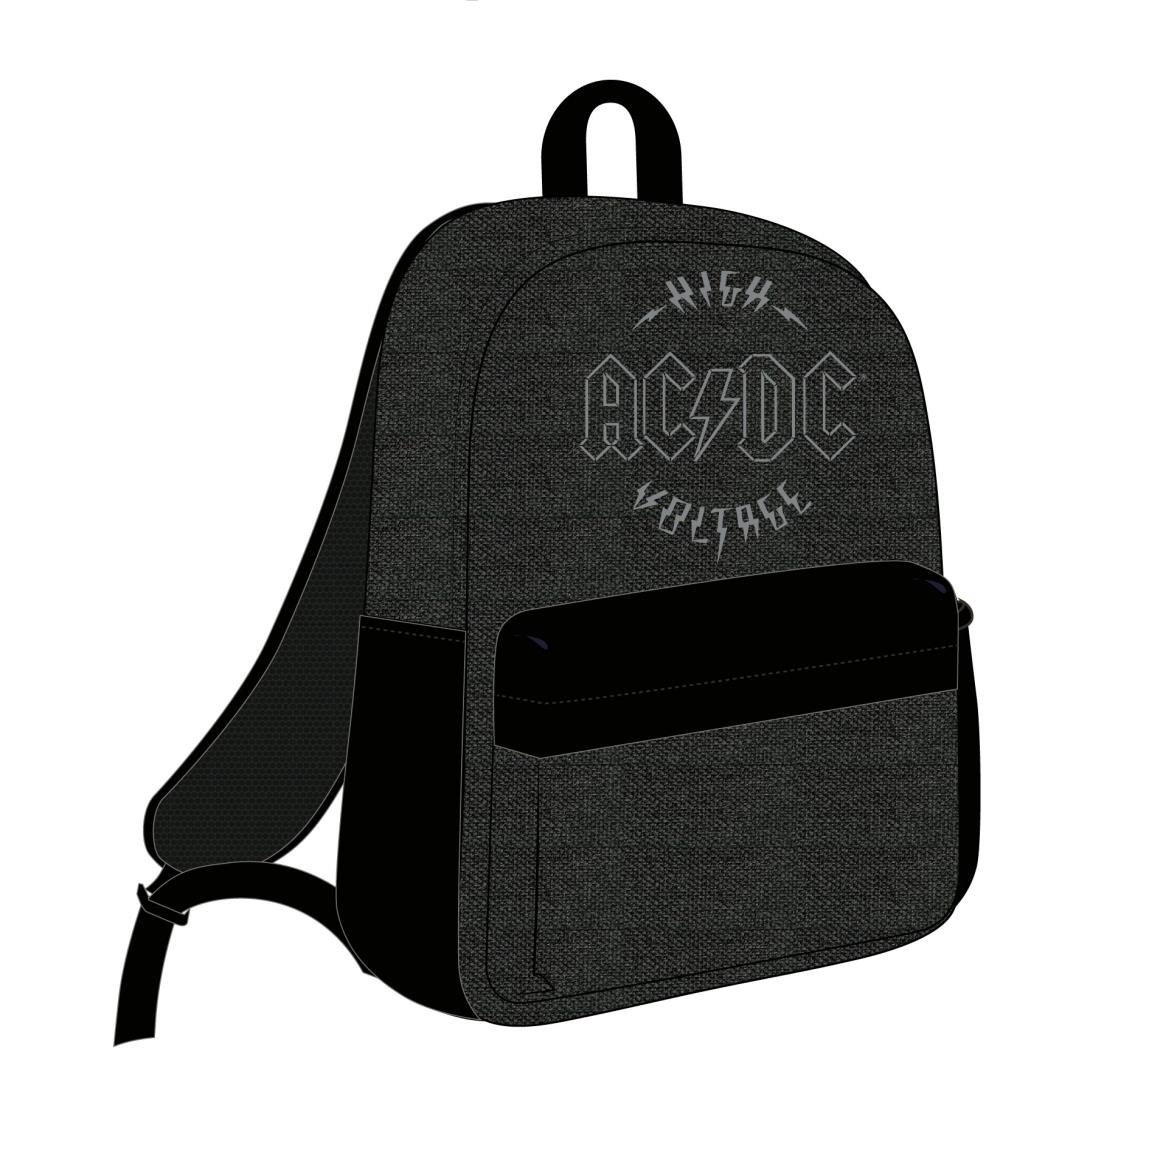 AC/DC Backpack Hgh Voltage